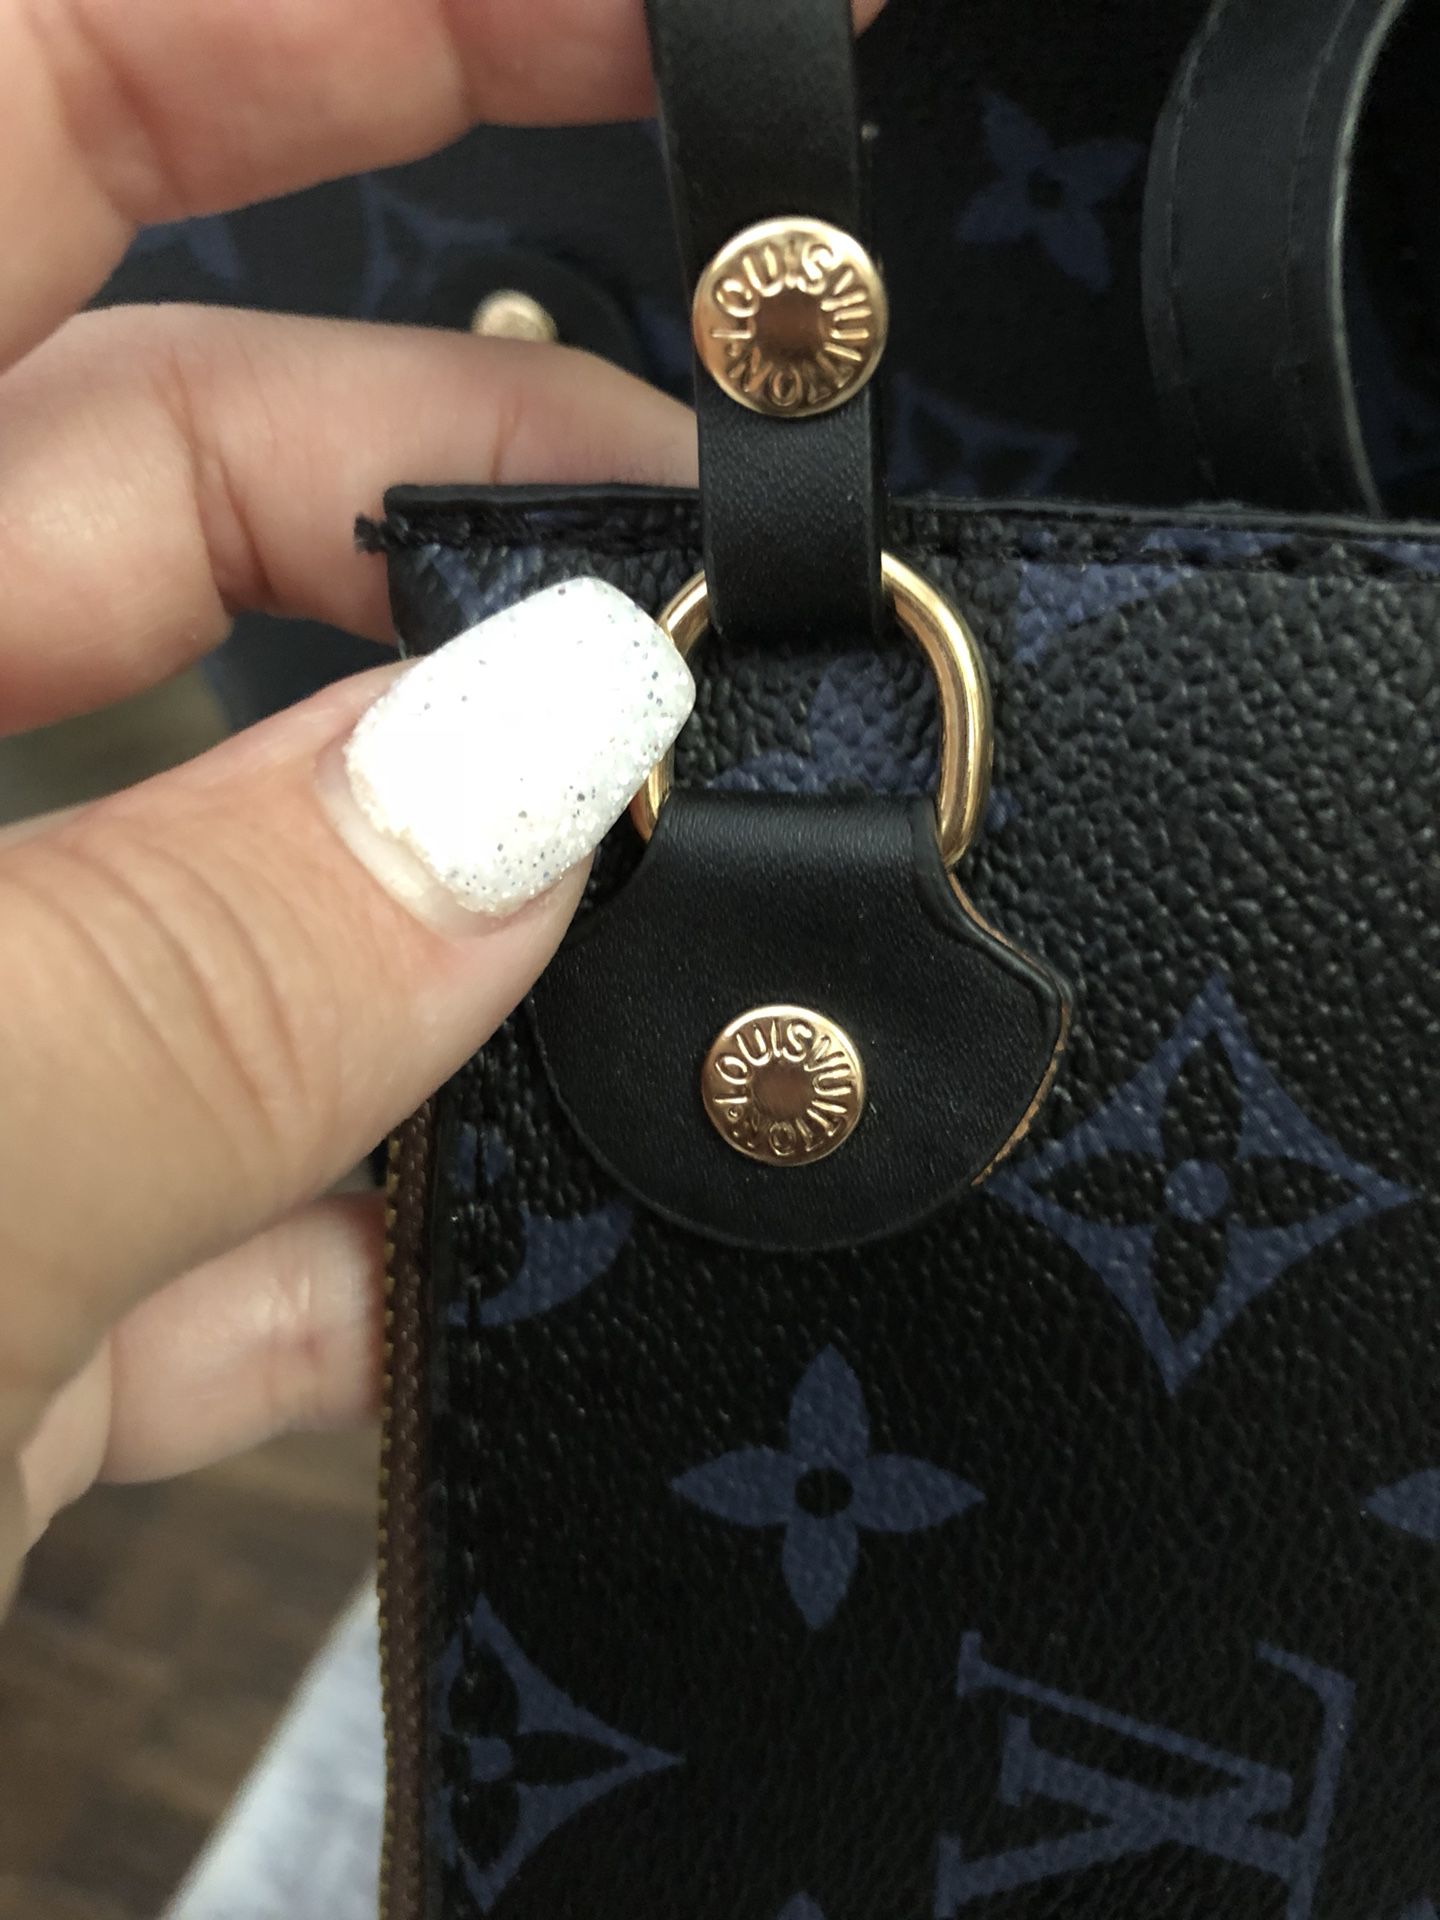 Louis Vuitton Monogram Neverfull Tote Bag for Sale in Austin, TX - OfferUp